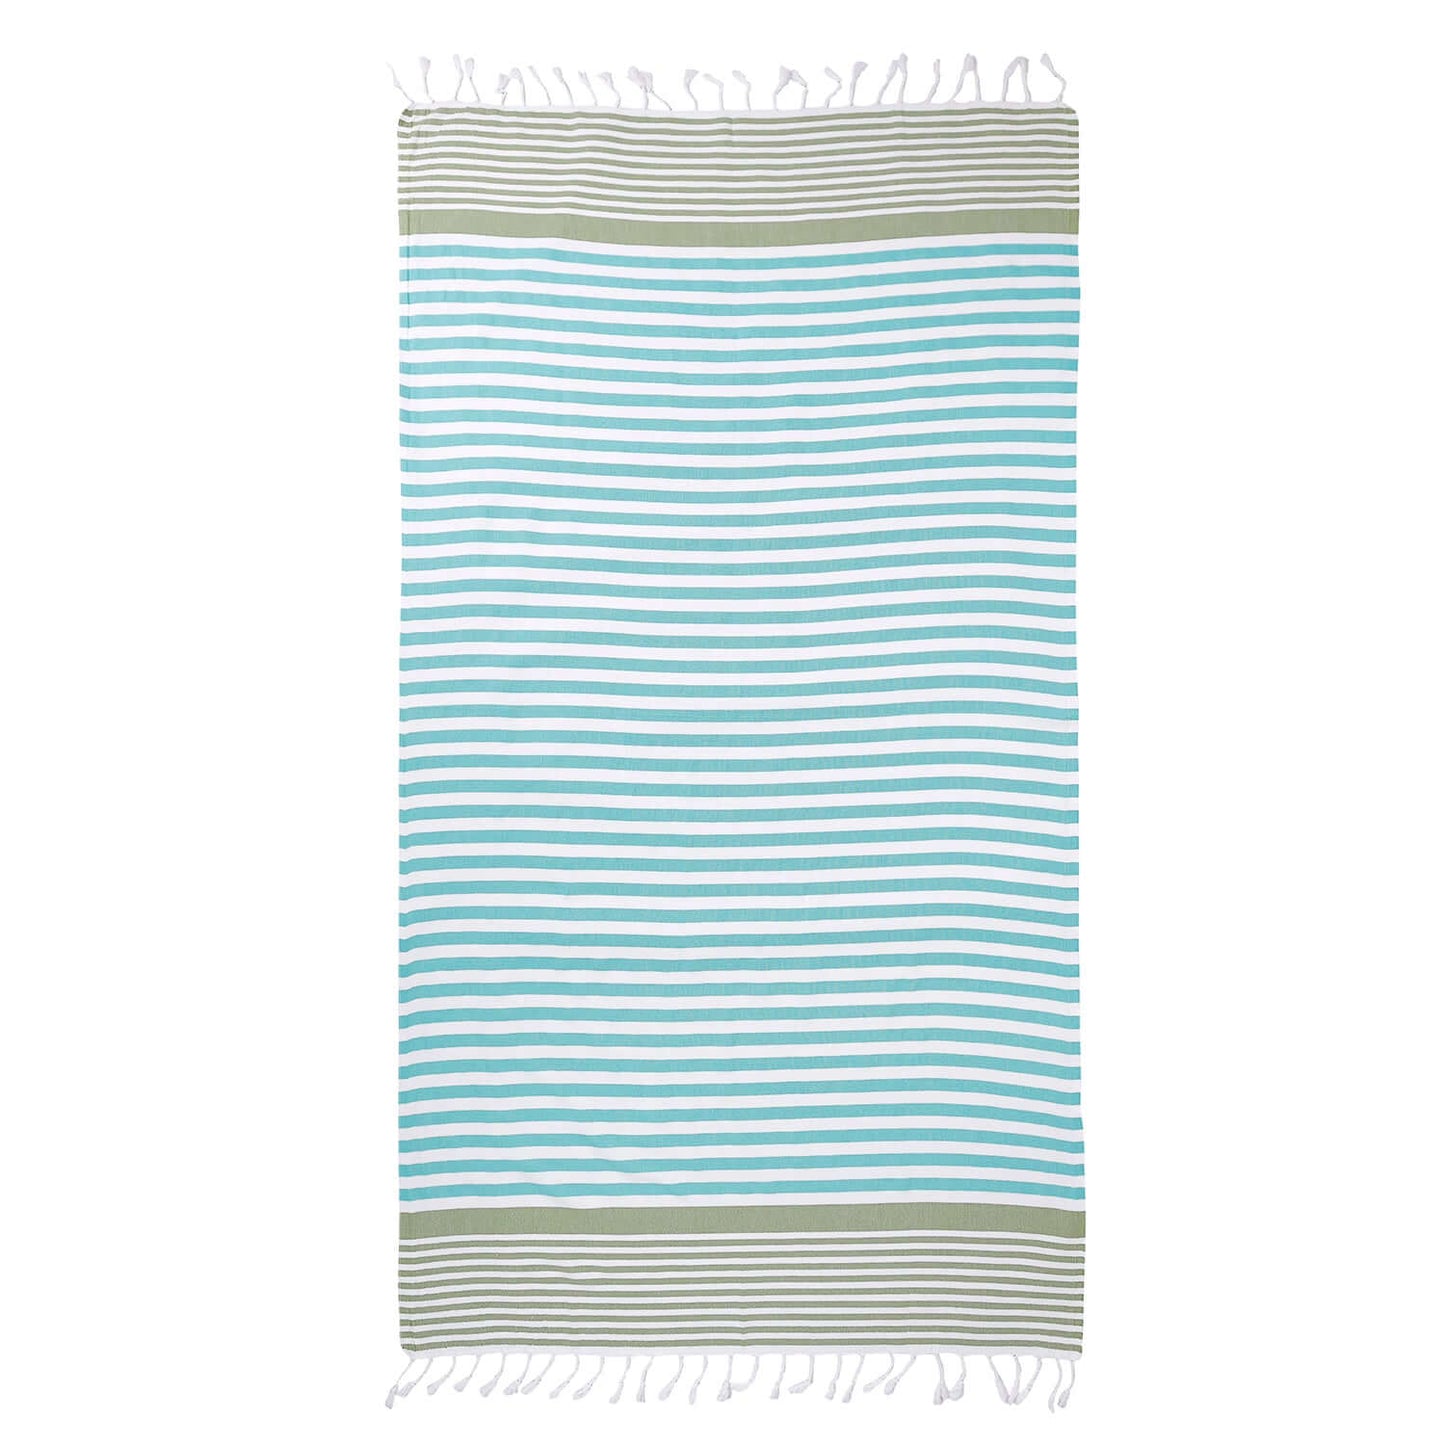  Loom Legacy turquoise and green beach towel with subtle horizontal stripes and white tassels along the top and bottom edges, displayed against a white background.